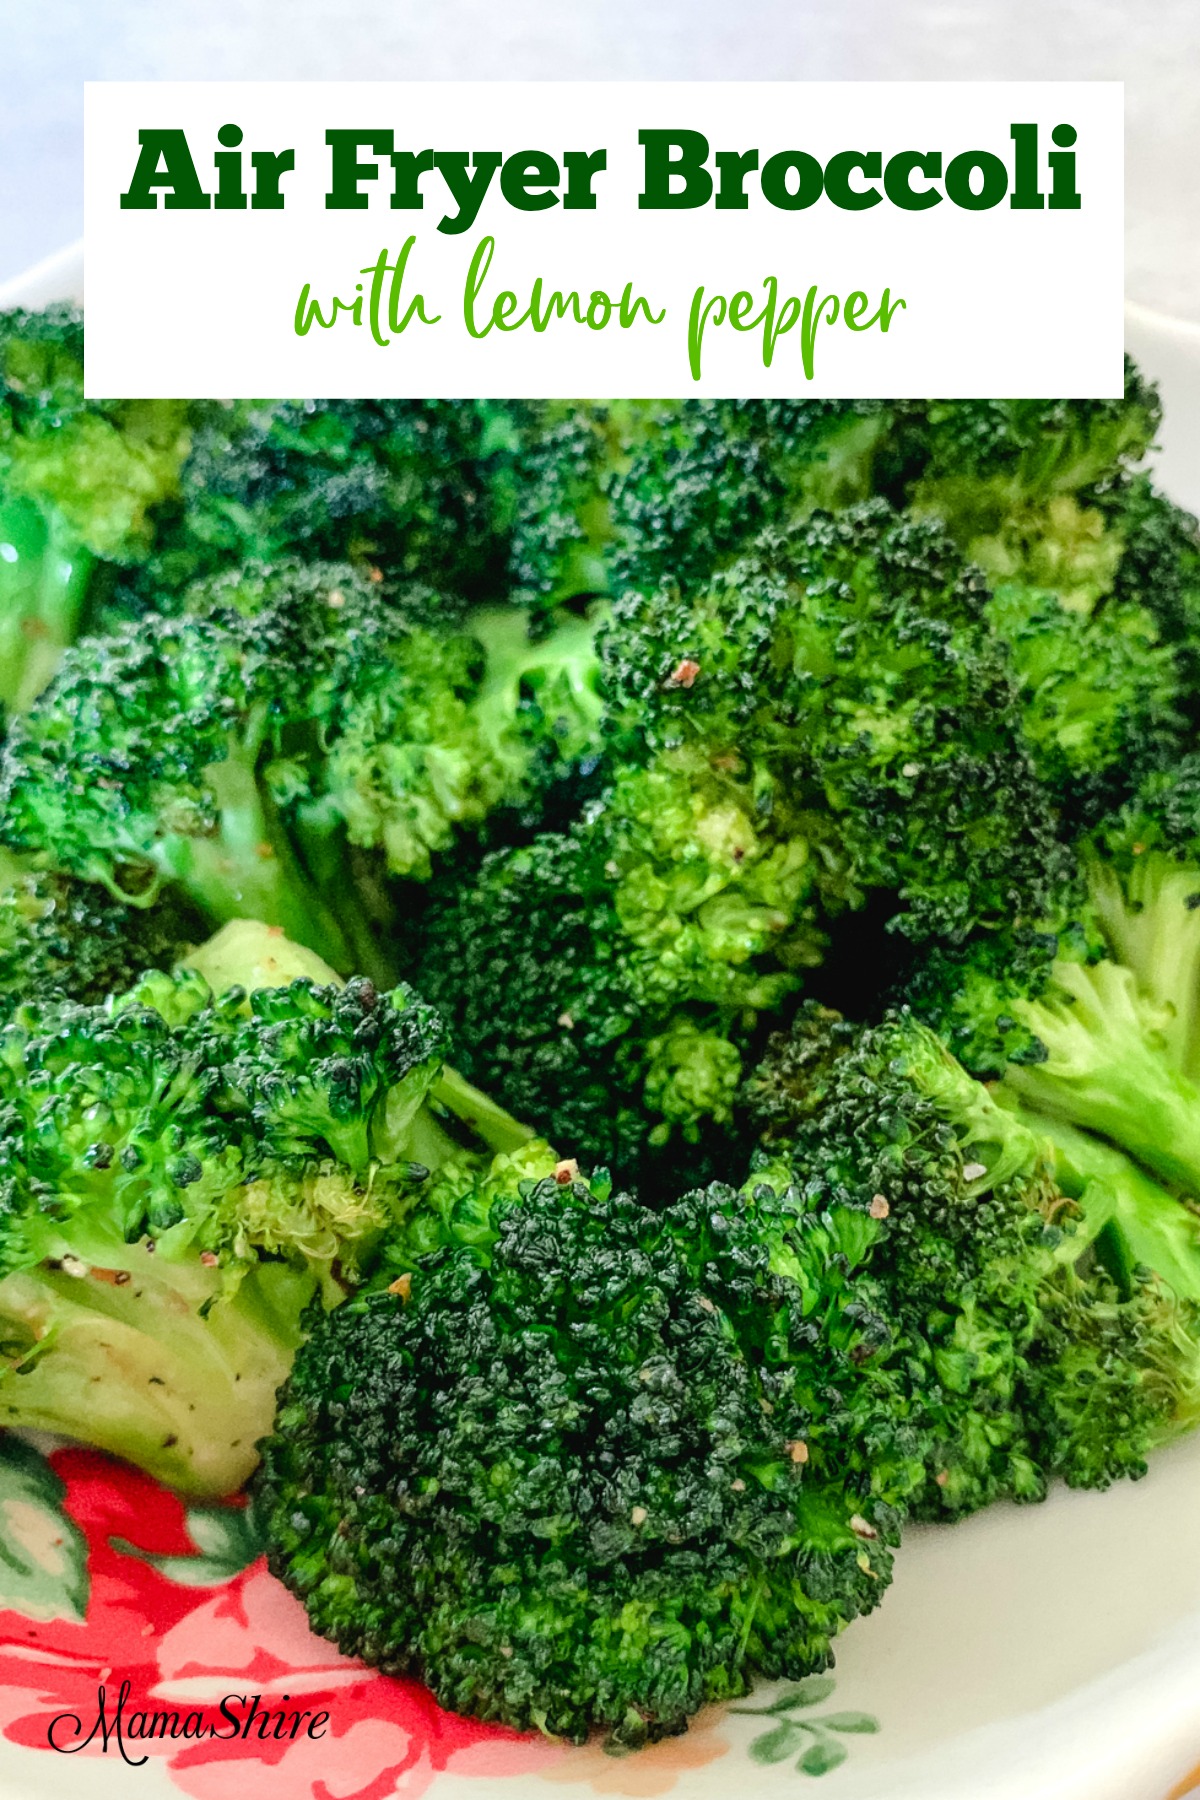 Air-fried broccoli with lemon pepper